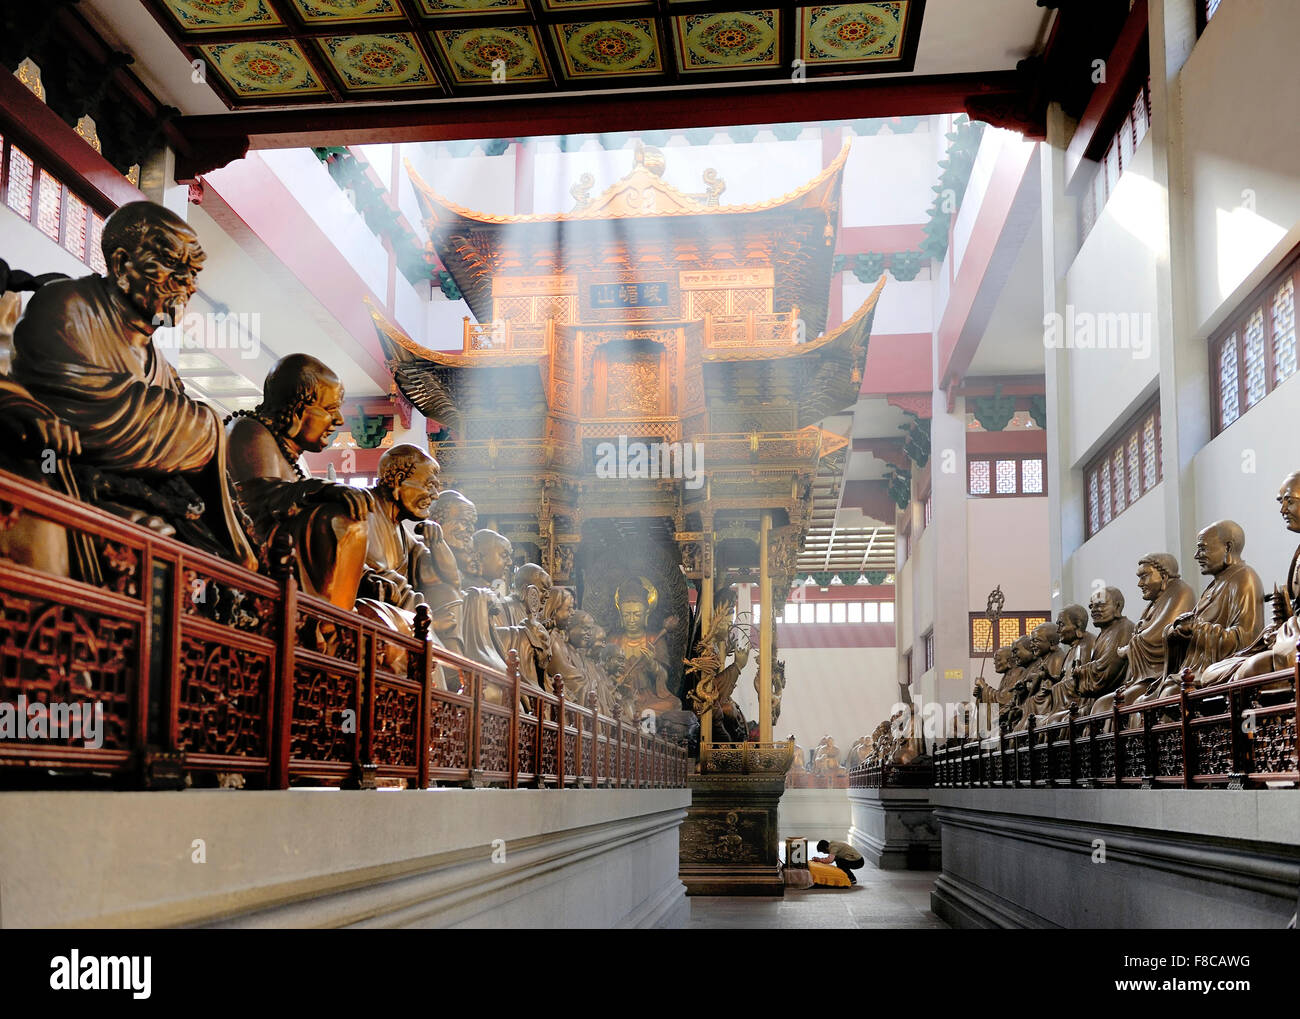 Hall with statues at Lingyin Temple, Hangzhou, Shandong Province, China Stock Photo